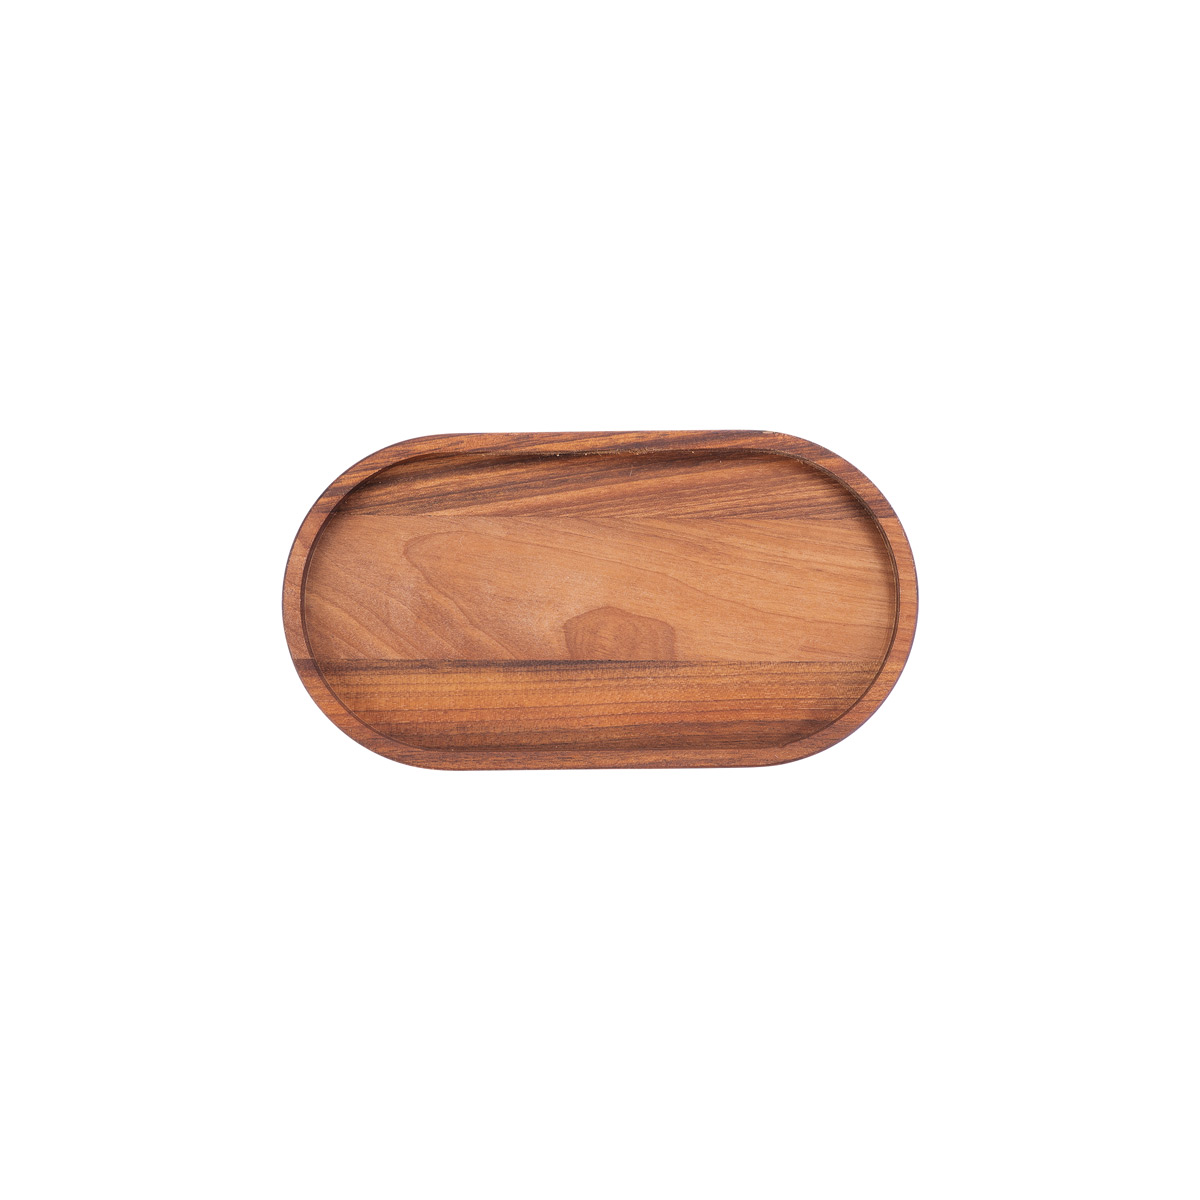 Bowls and Dishes Pure Walnut Wood Duurzame Serveertray ovaal S 22,5 x 12 cm - Walnoot hout | BBQ | Cadeautip!